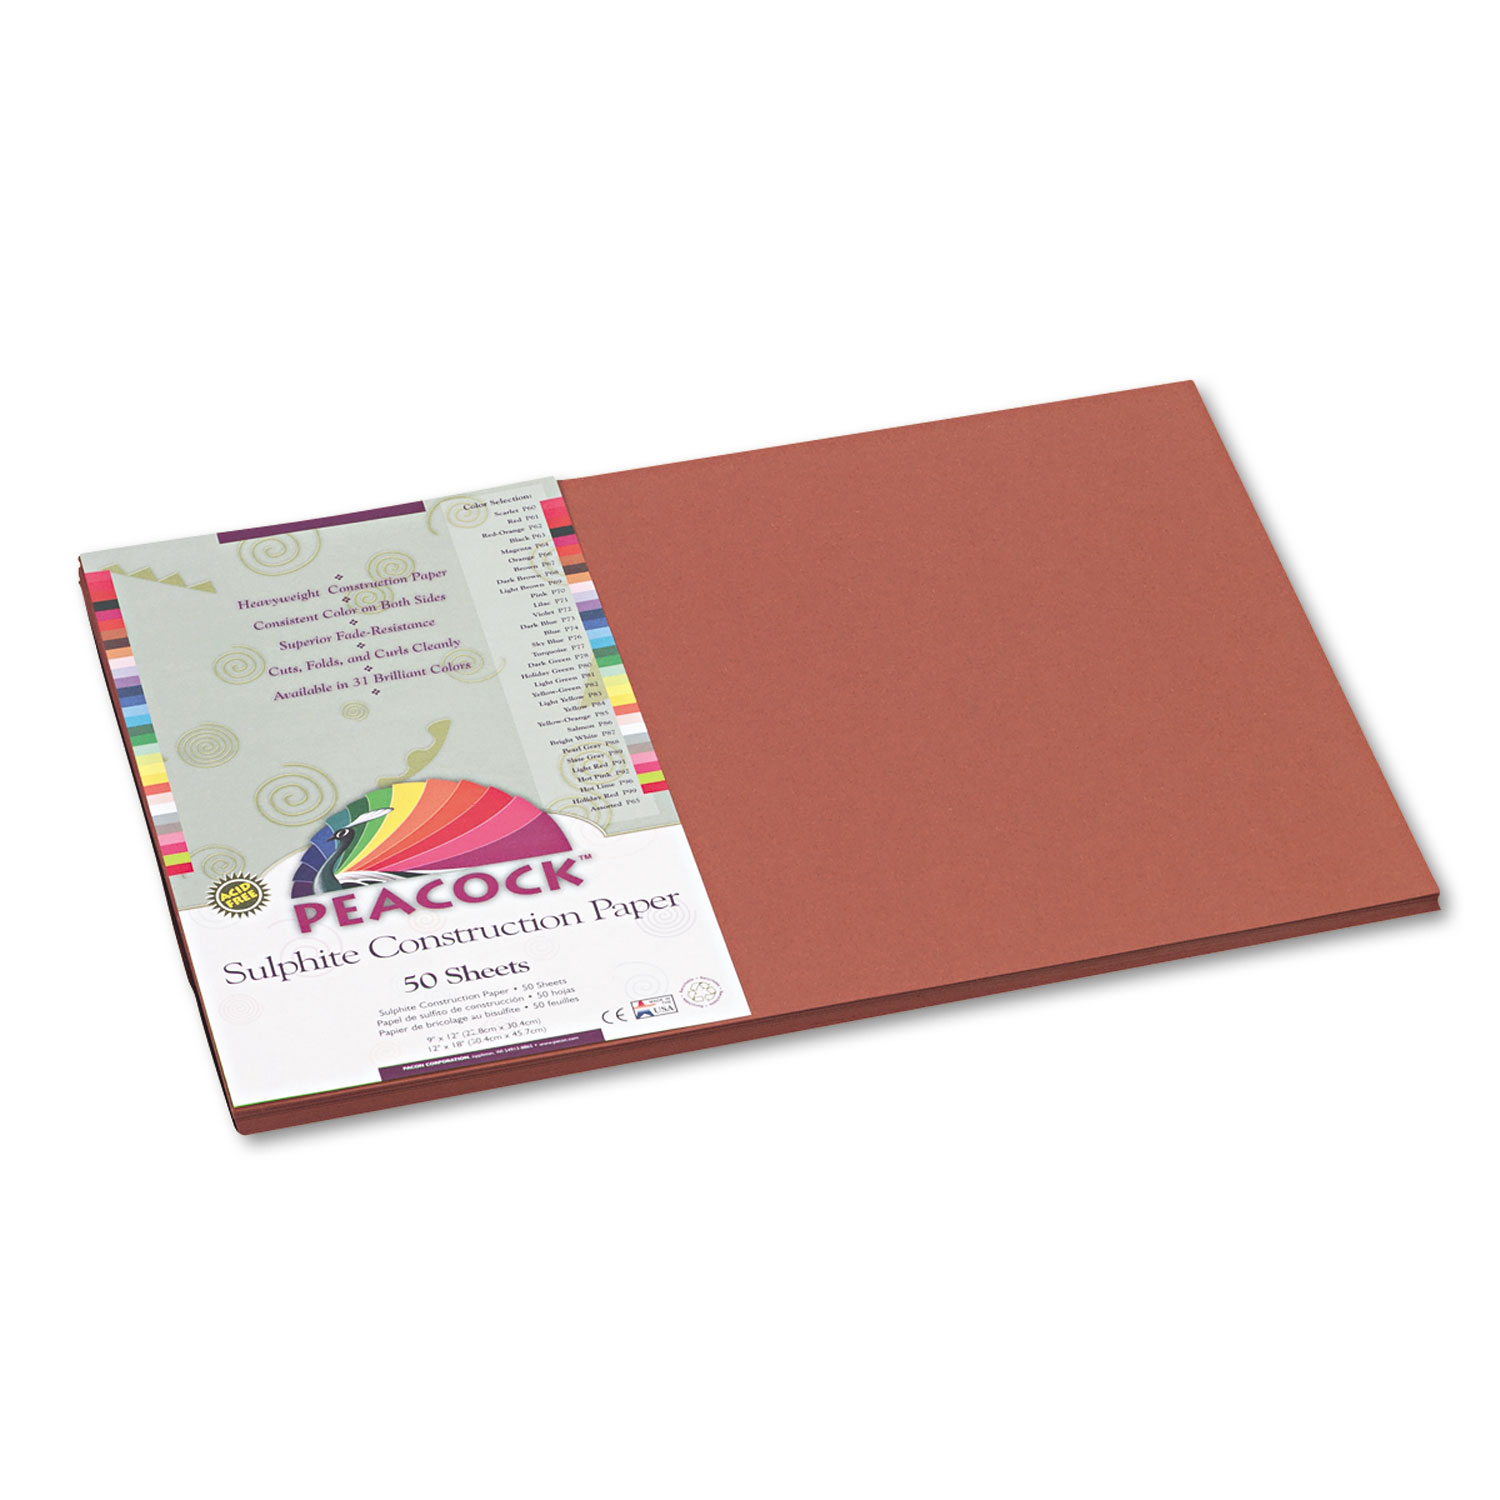 Peacock Sulphite Construction Paper, 76 lbs., 12 x 18, Brown, 50 Sheets/Pack